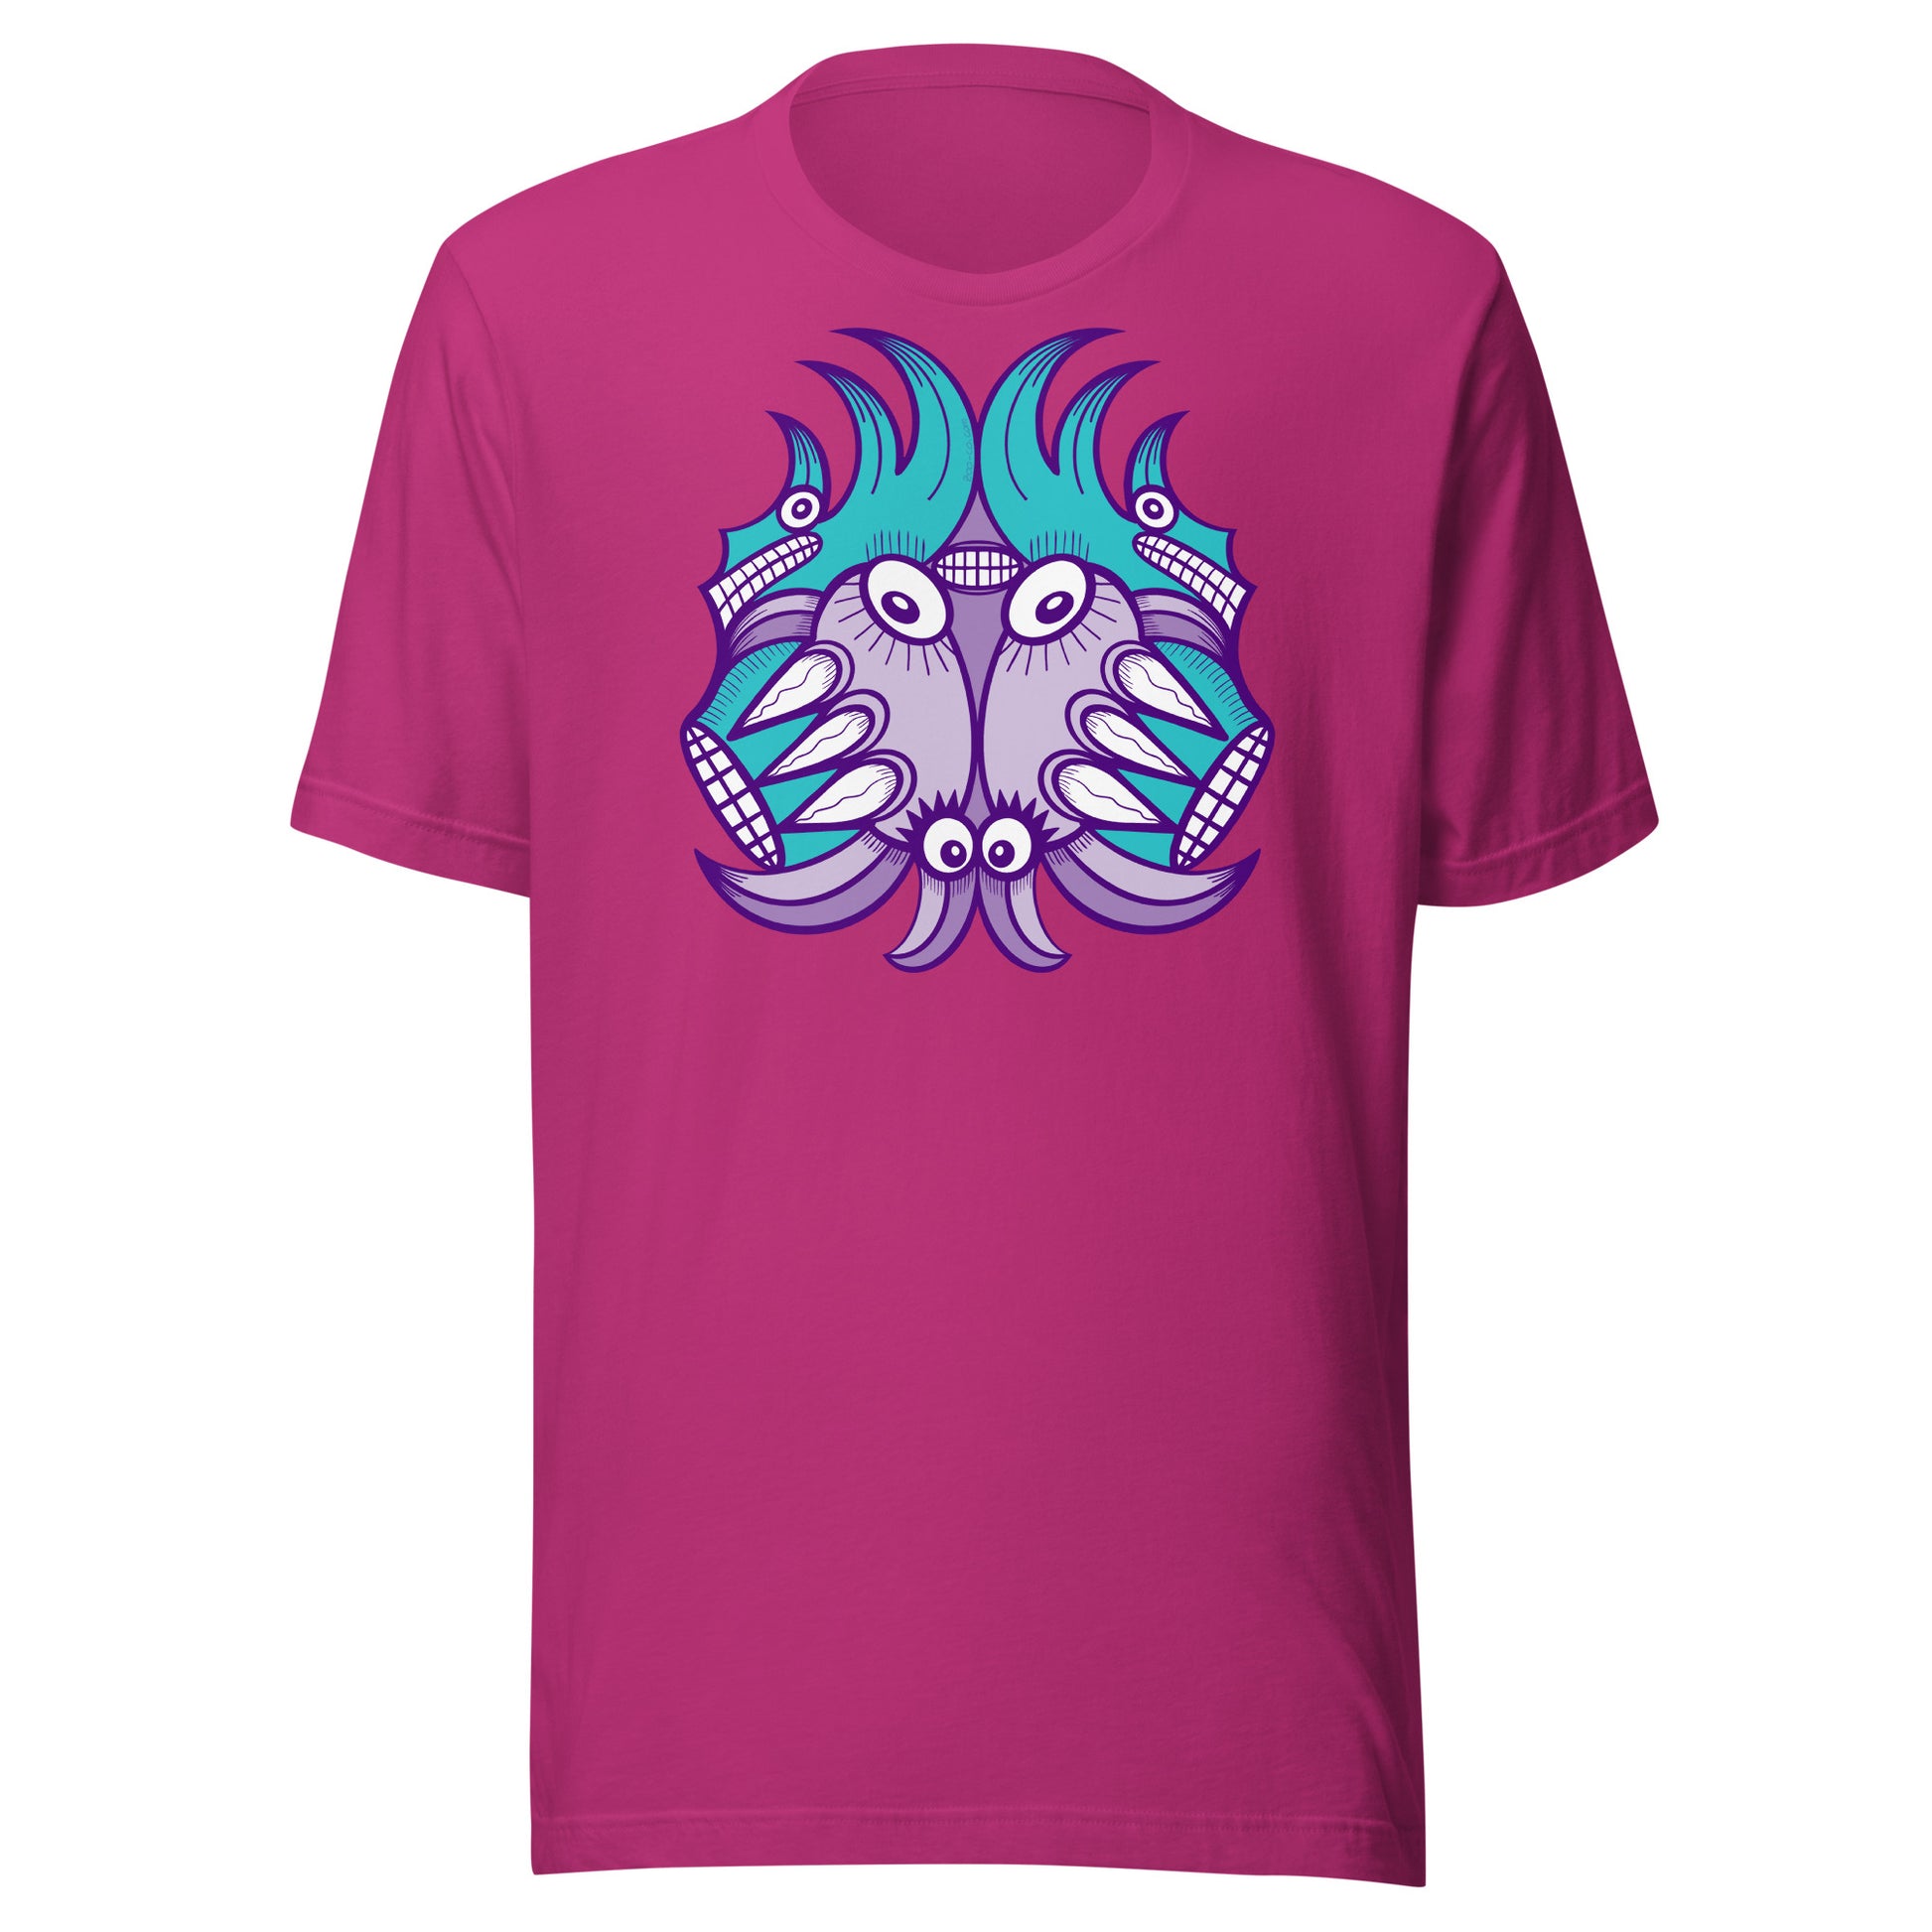 Planet 5: Aquatic Creatures from the Doodles of the Galaxy - Unisex t-shirt. Berry color. Front view